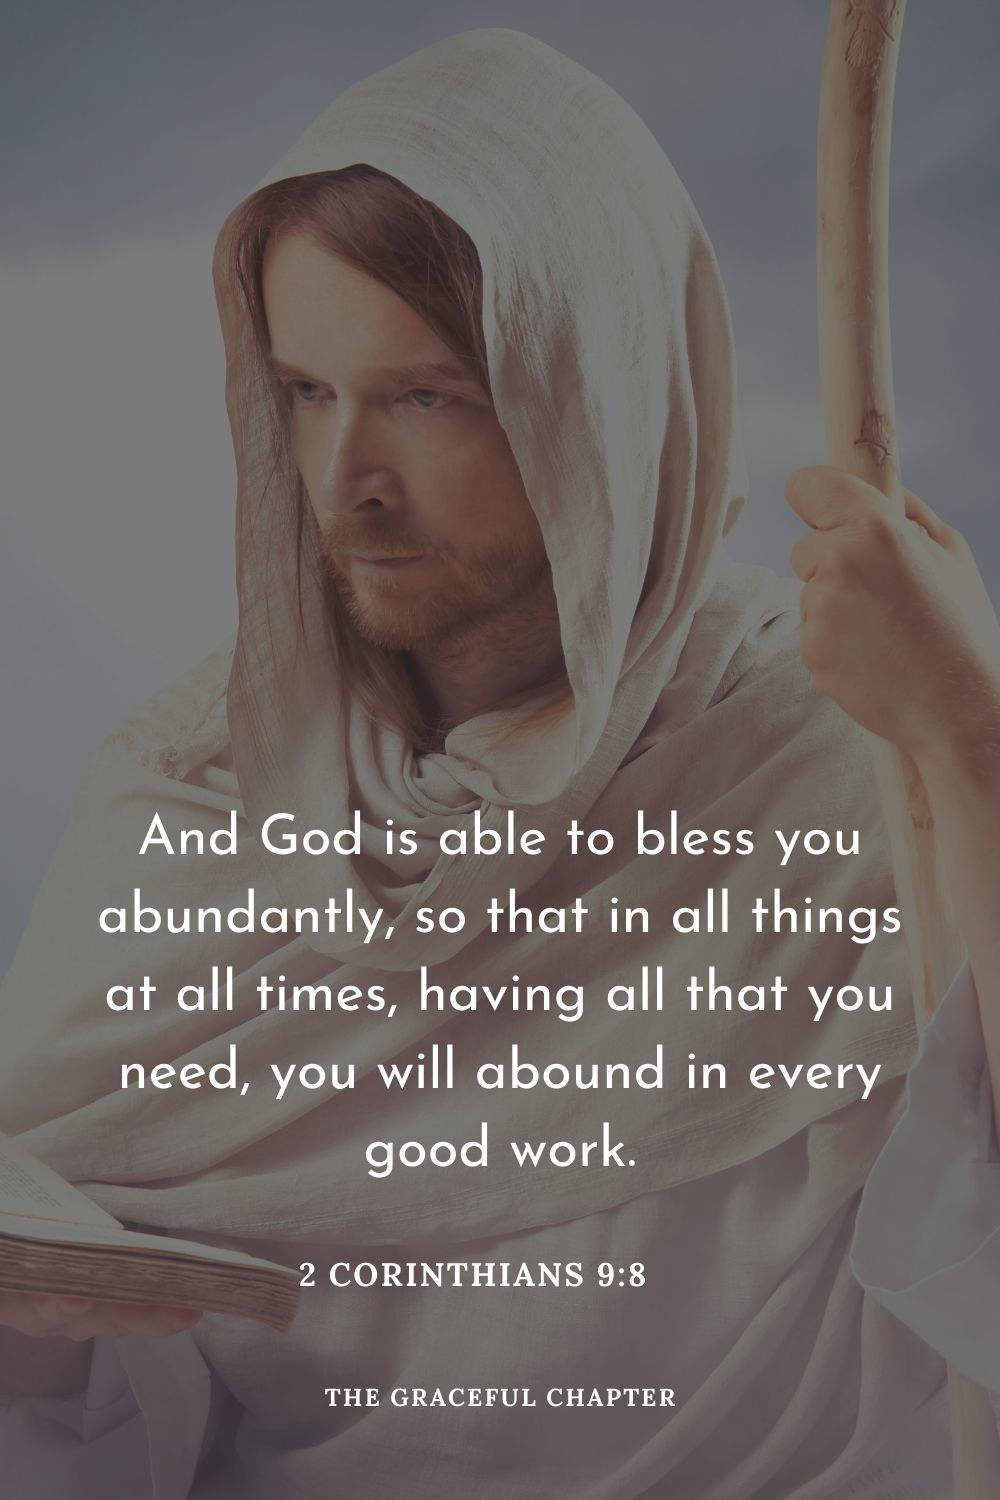 And God is able to bless you abundantly, so that in all things at all times, having all that you need, you will abound in every good work.